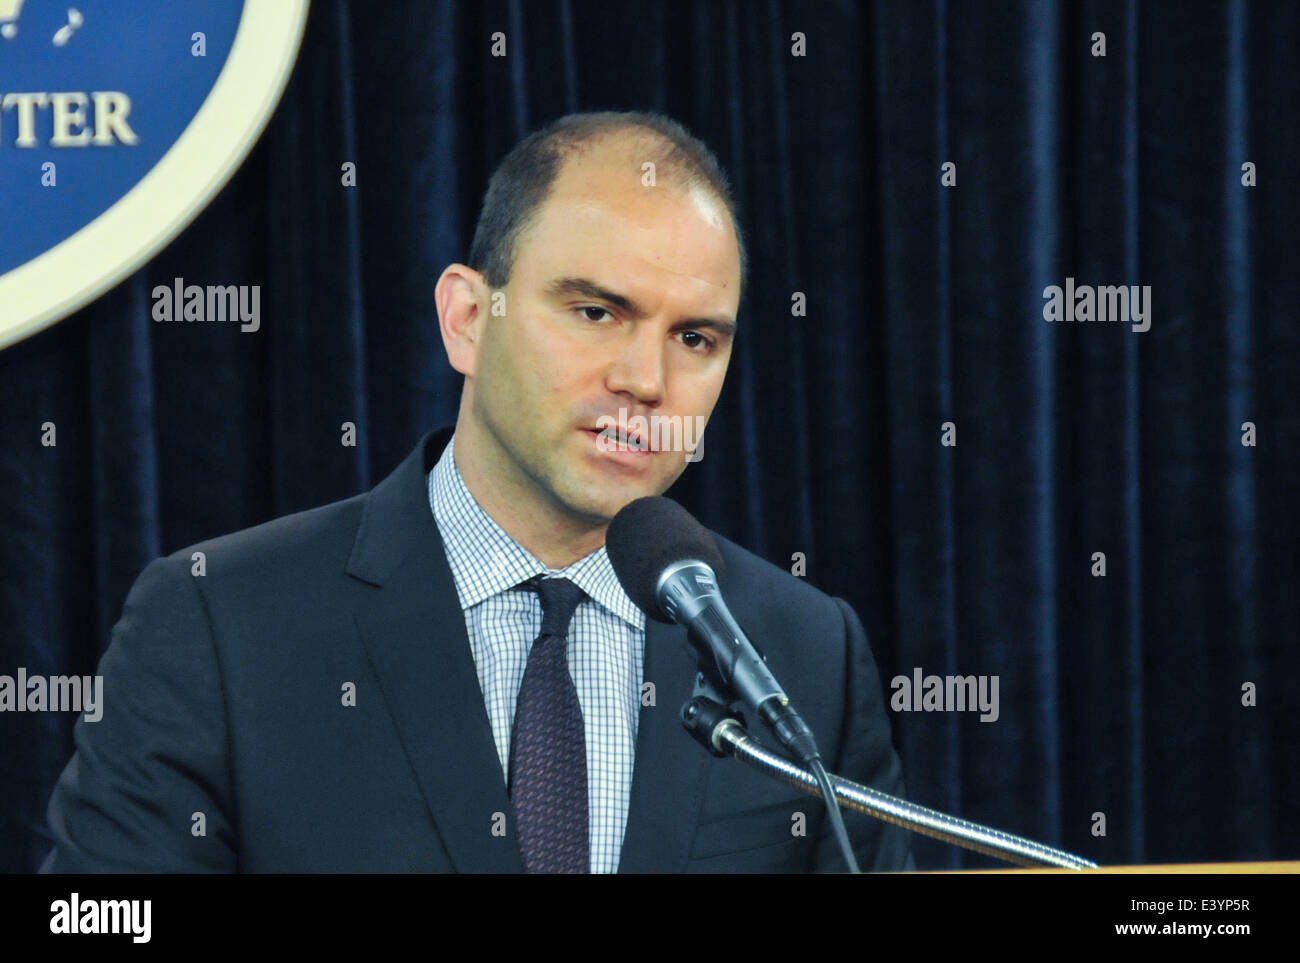 Washington, USA. 1st July, 2014. Ben Rhodes, Obama's deputy national security advisor, speaks at a press briefing in Washington, DC, capital of the United States, July 1, 2014. The United States and China should find common ground and develop cooperation even as the two countries disagree on certain issues, Rhodes said Tuesday. © Zhou Erjie/Xinhua/Alamy Live News Stock Photo